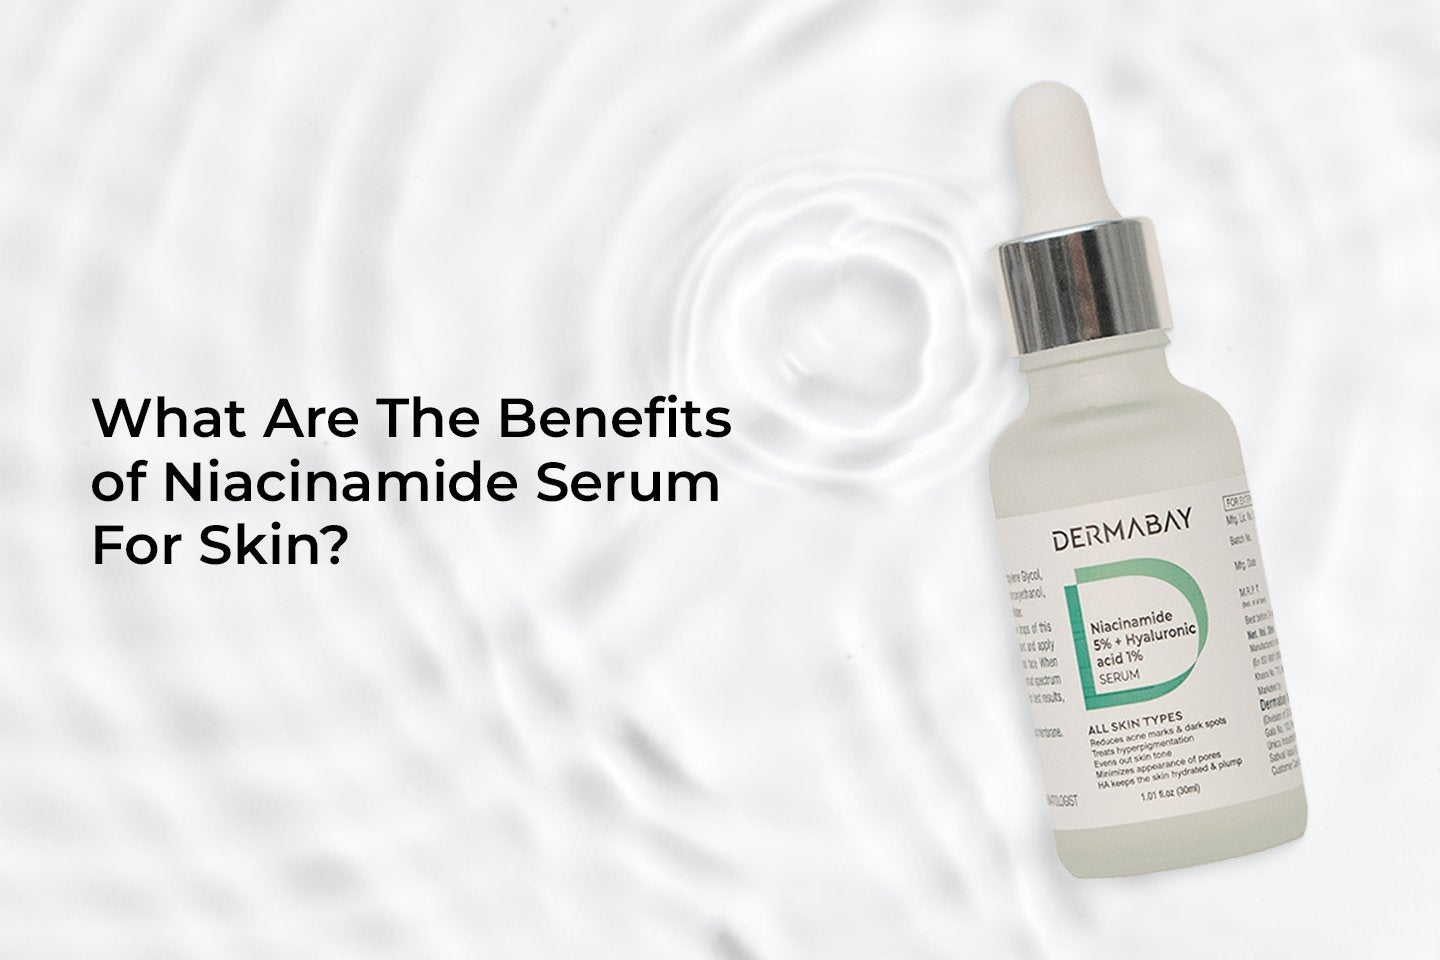 What Are The Benefits of Niacinamide Serum For Skin? - Dermabay